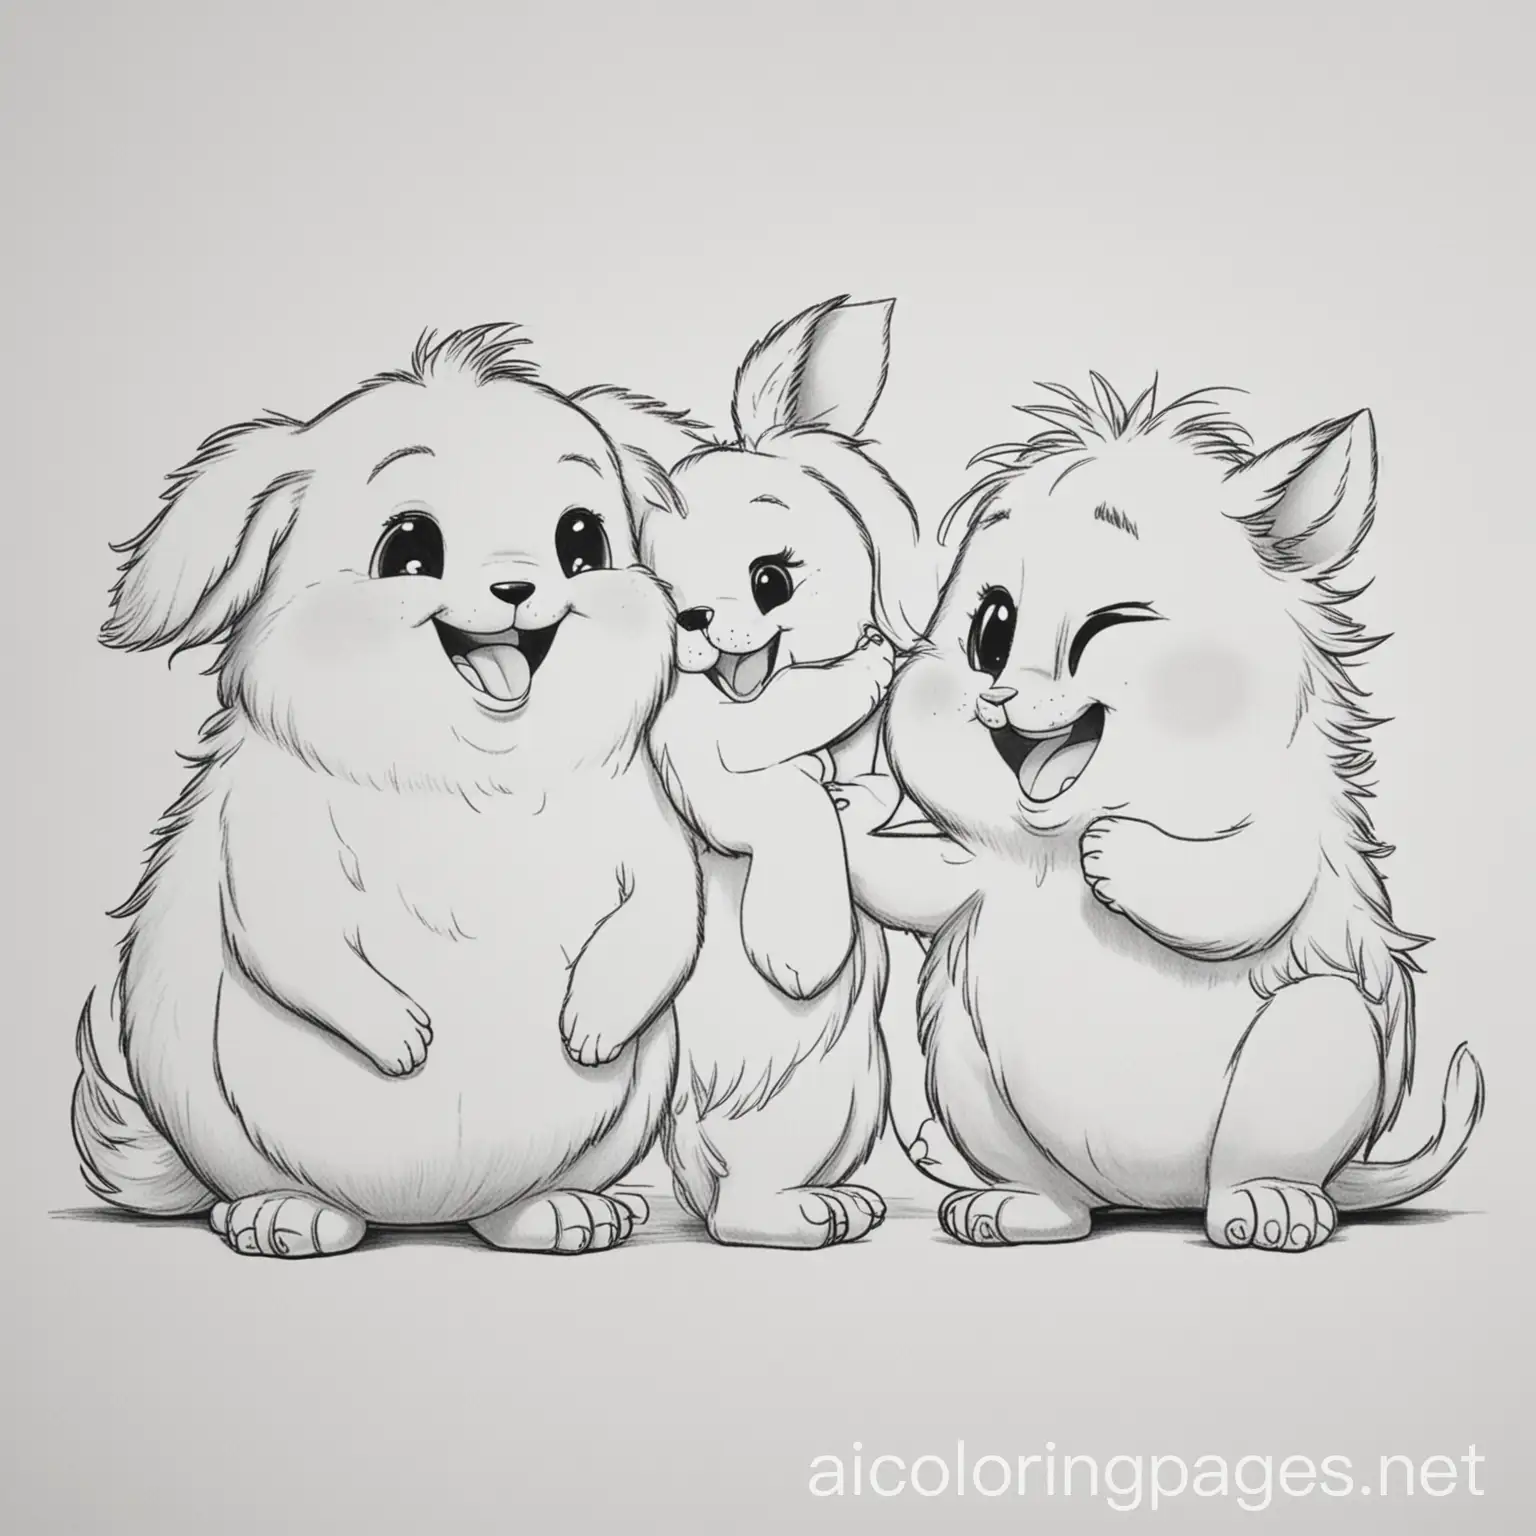 2 animals that are friends and laugh, Coloring Page, black and white, line art, white background, Simplicity, Ample White Space